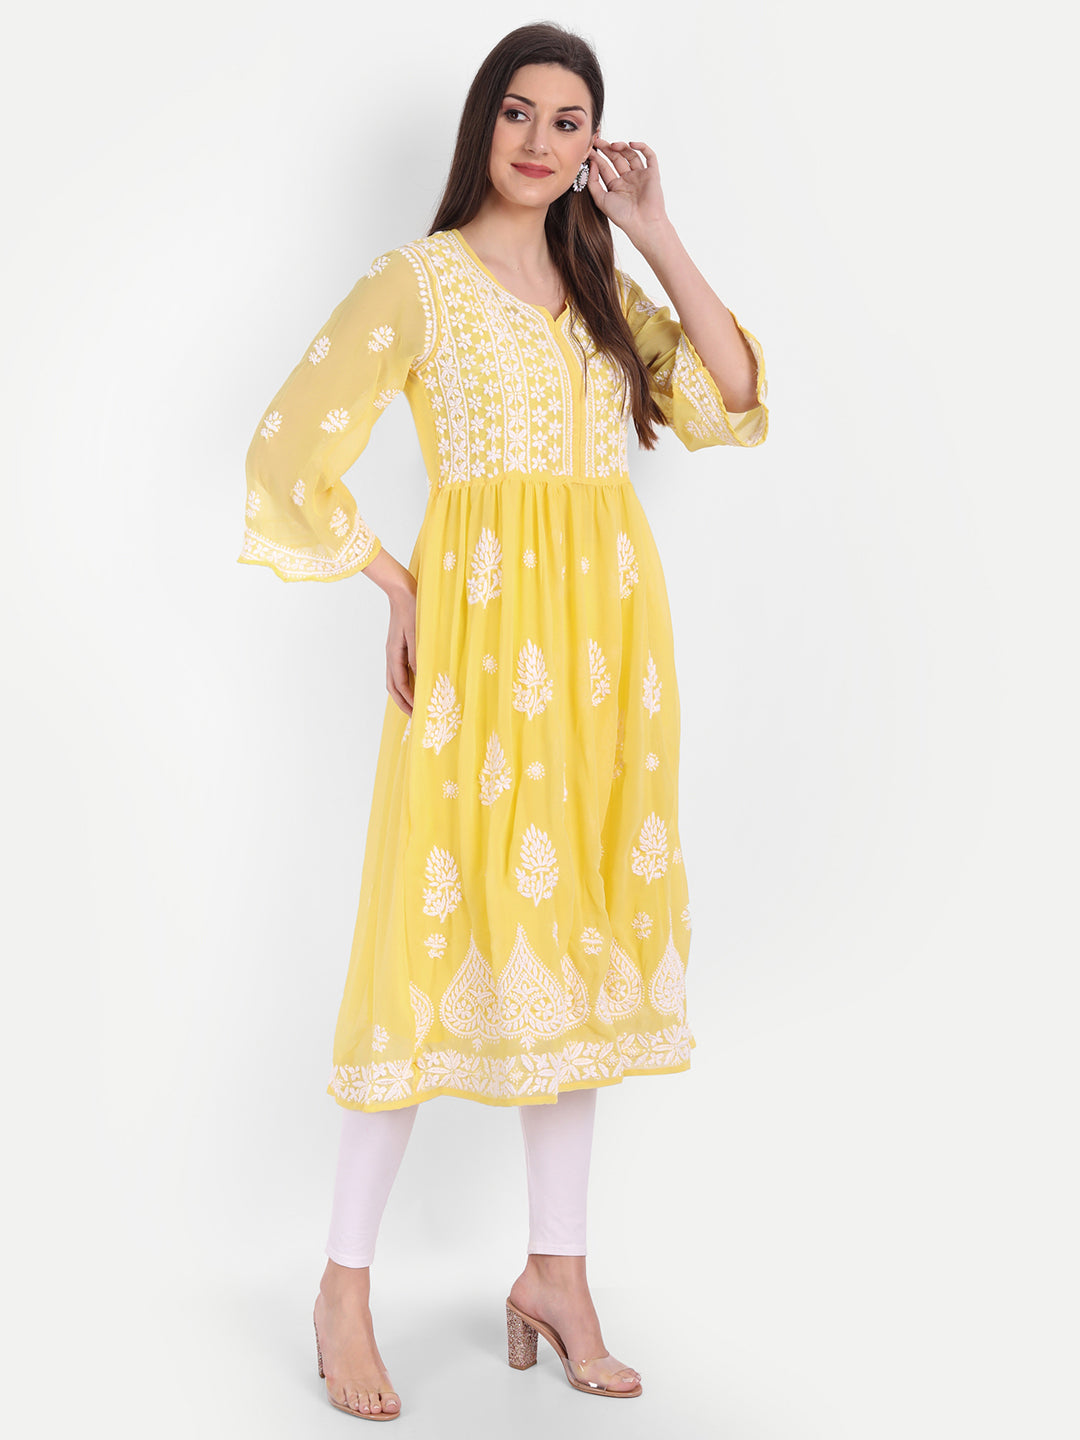 Buy Exotic India PorcelainRose Long Kurta TopKameez from Lucknow with Chi   PinkGarment Size 42 at Amazonin